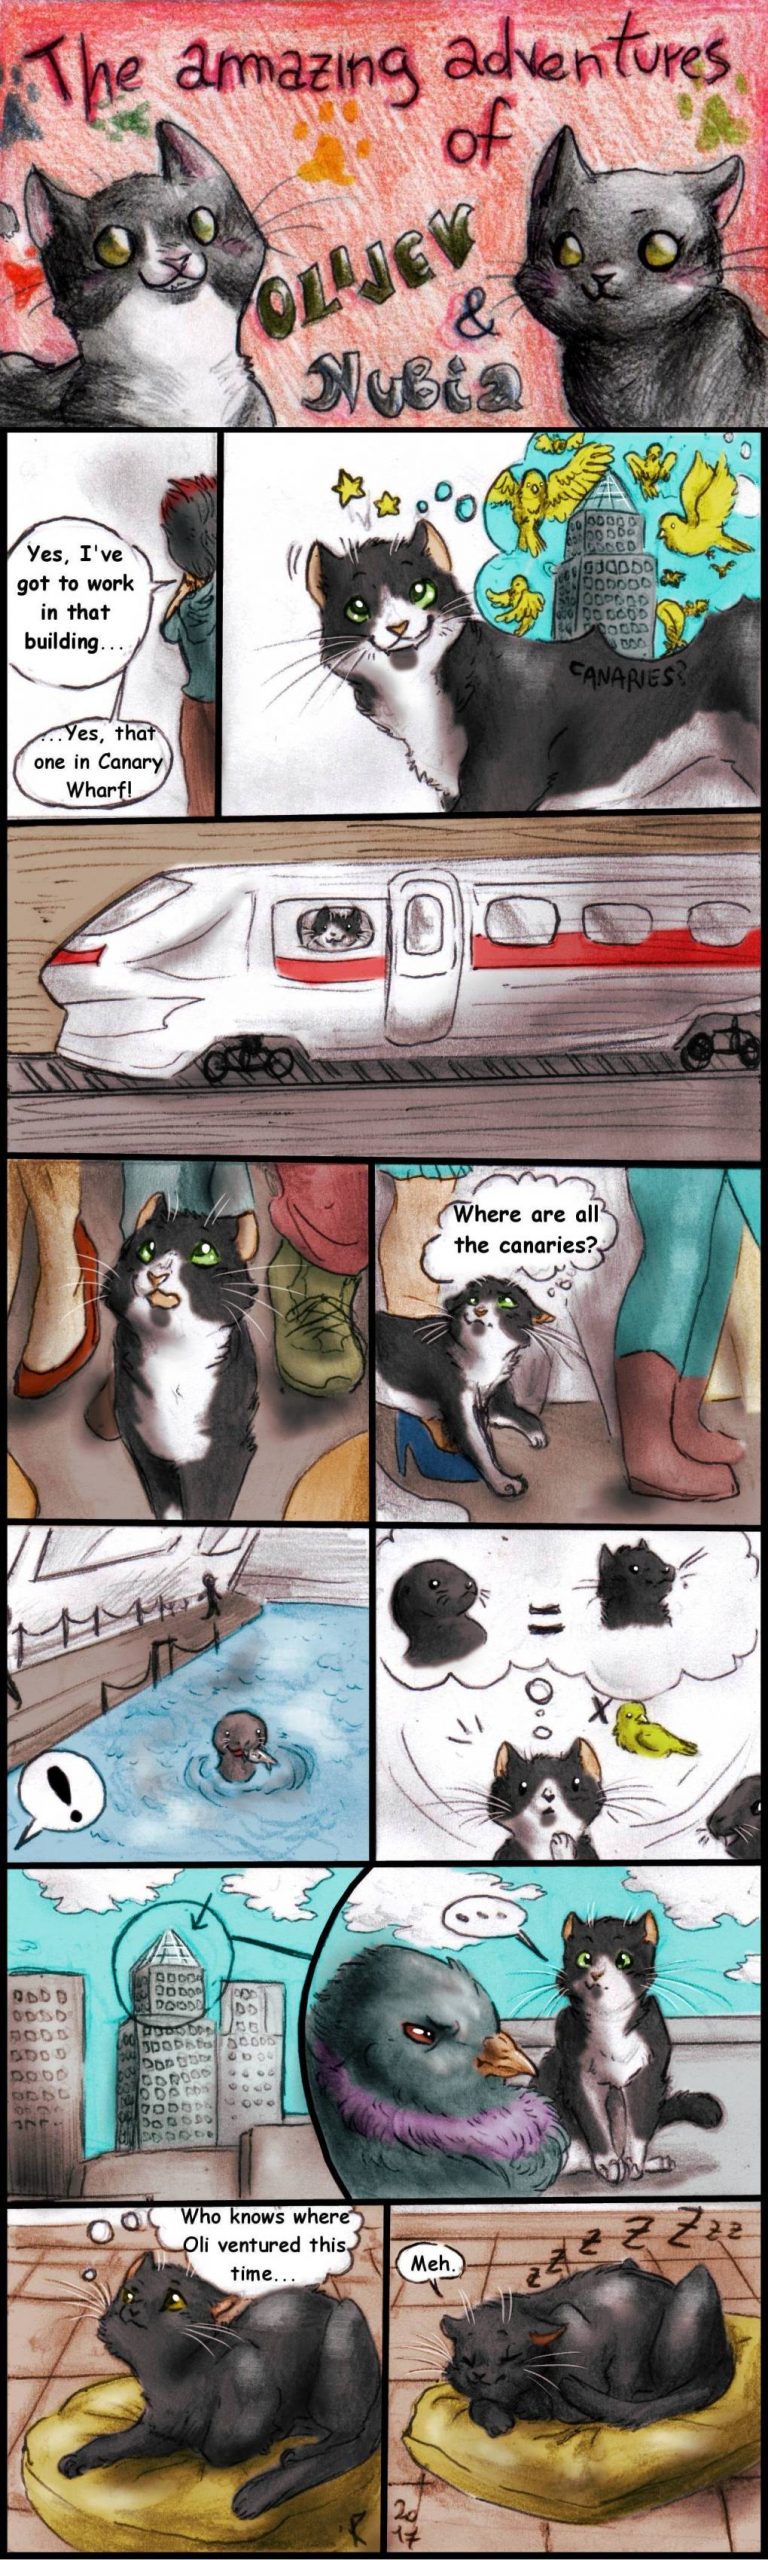 Blast From the Past: The Cats Trip to the City of Birds